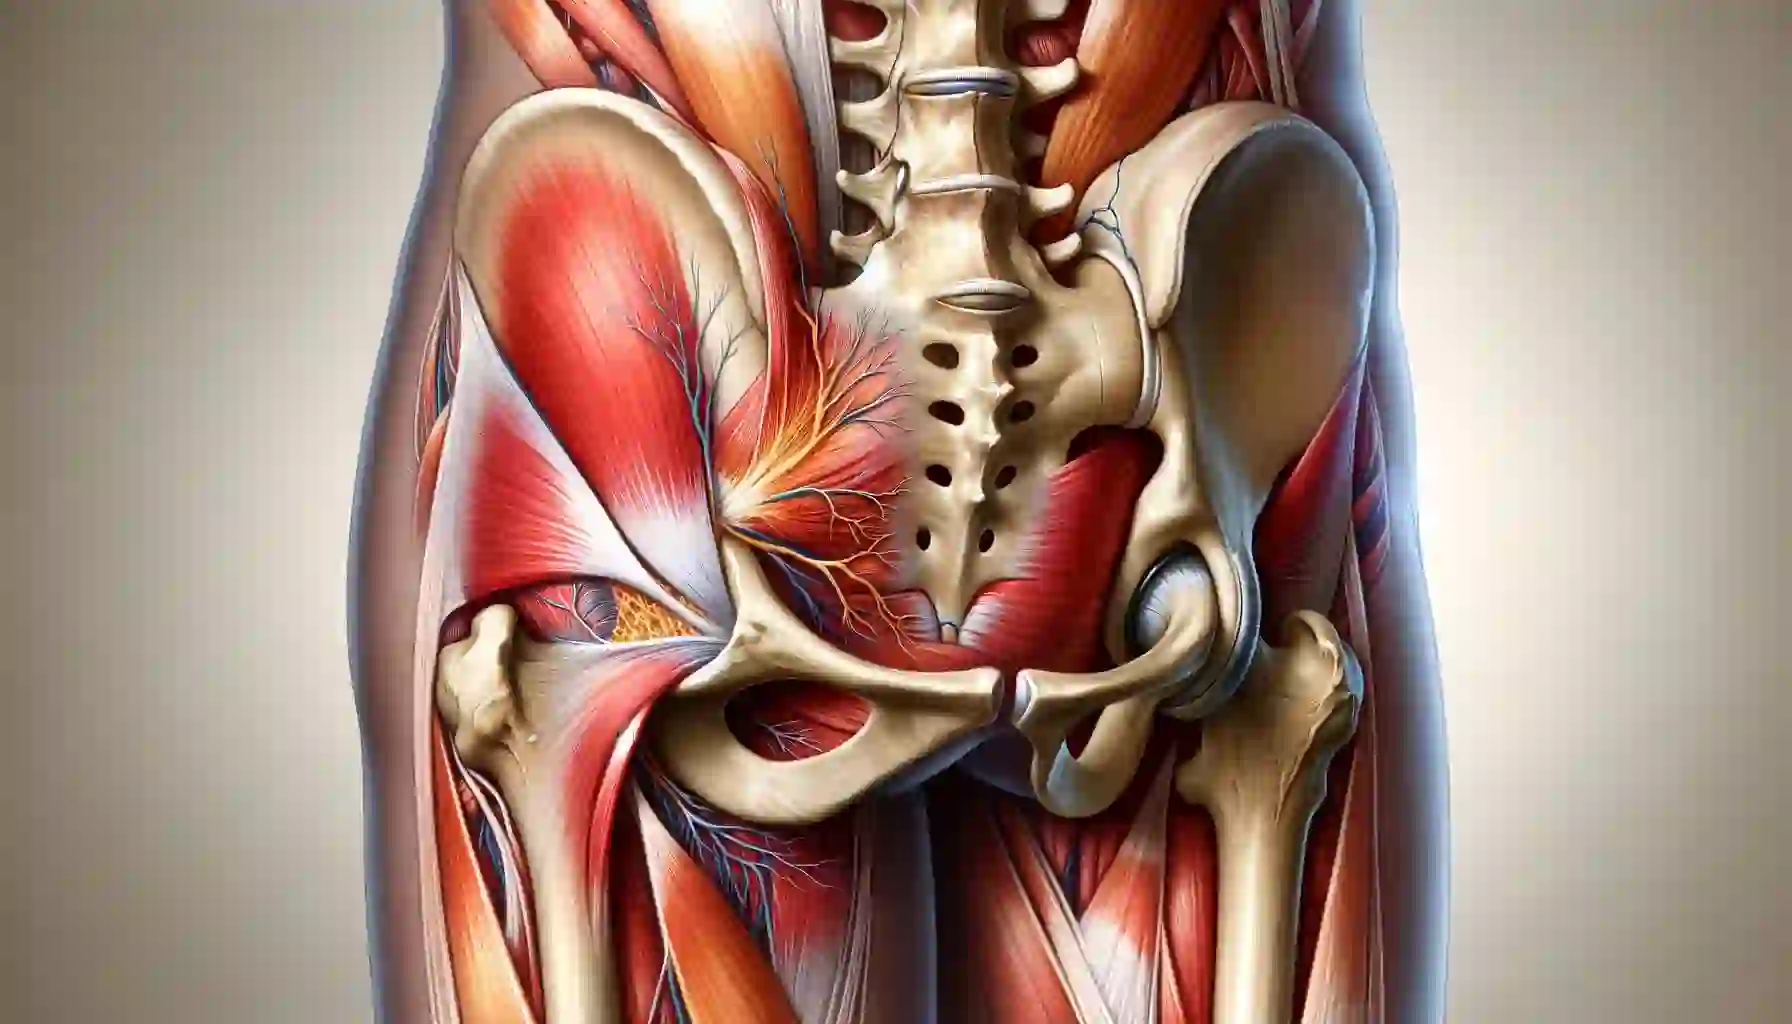 Piriformis Syndrome The Best 6 Exercises To Help Your Hip & Butt Pain. Dr Ken Nakamura Best Toronto Chiropractor